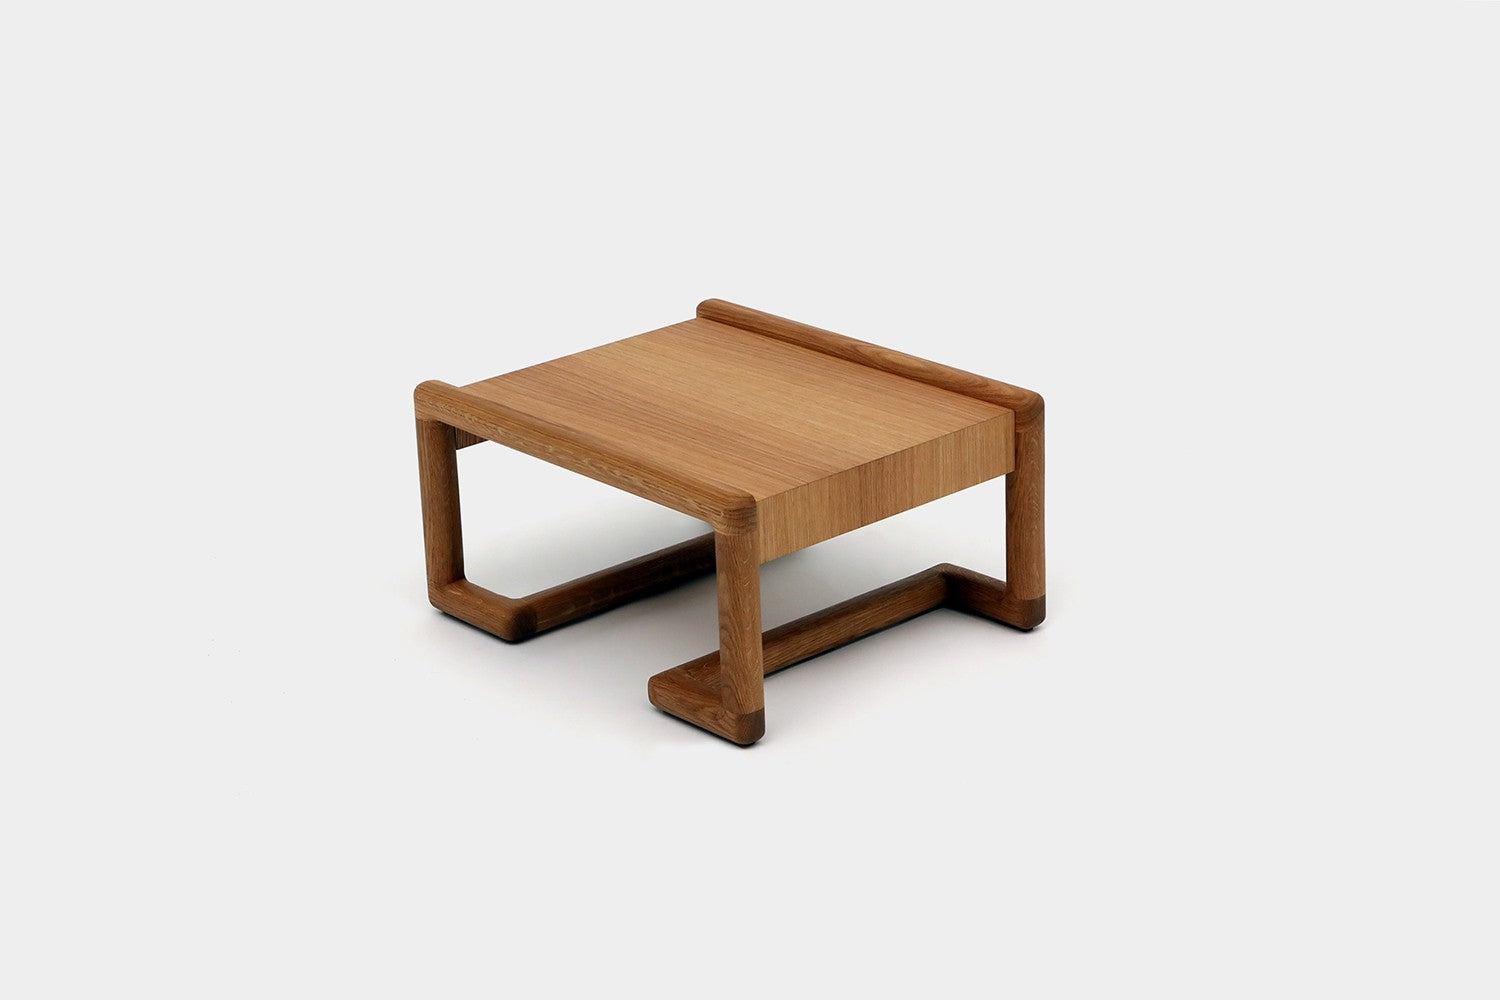 Untitled Tables